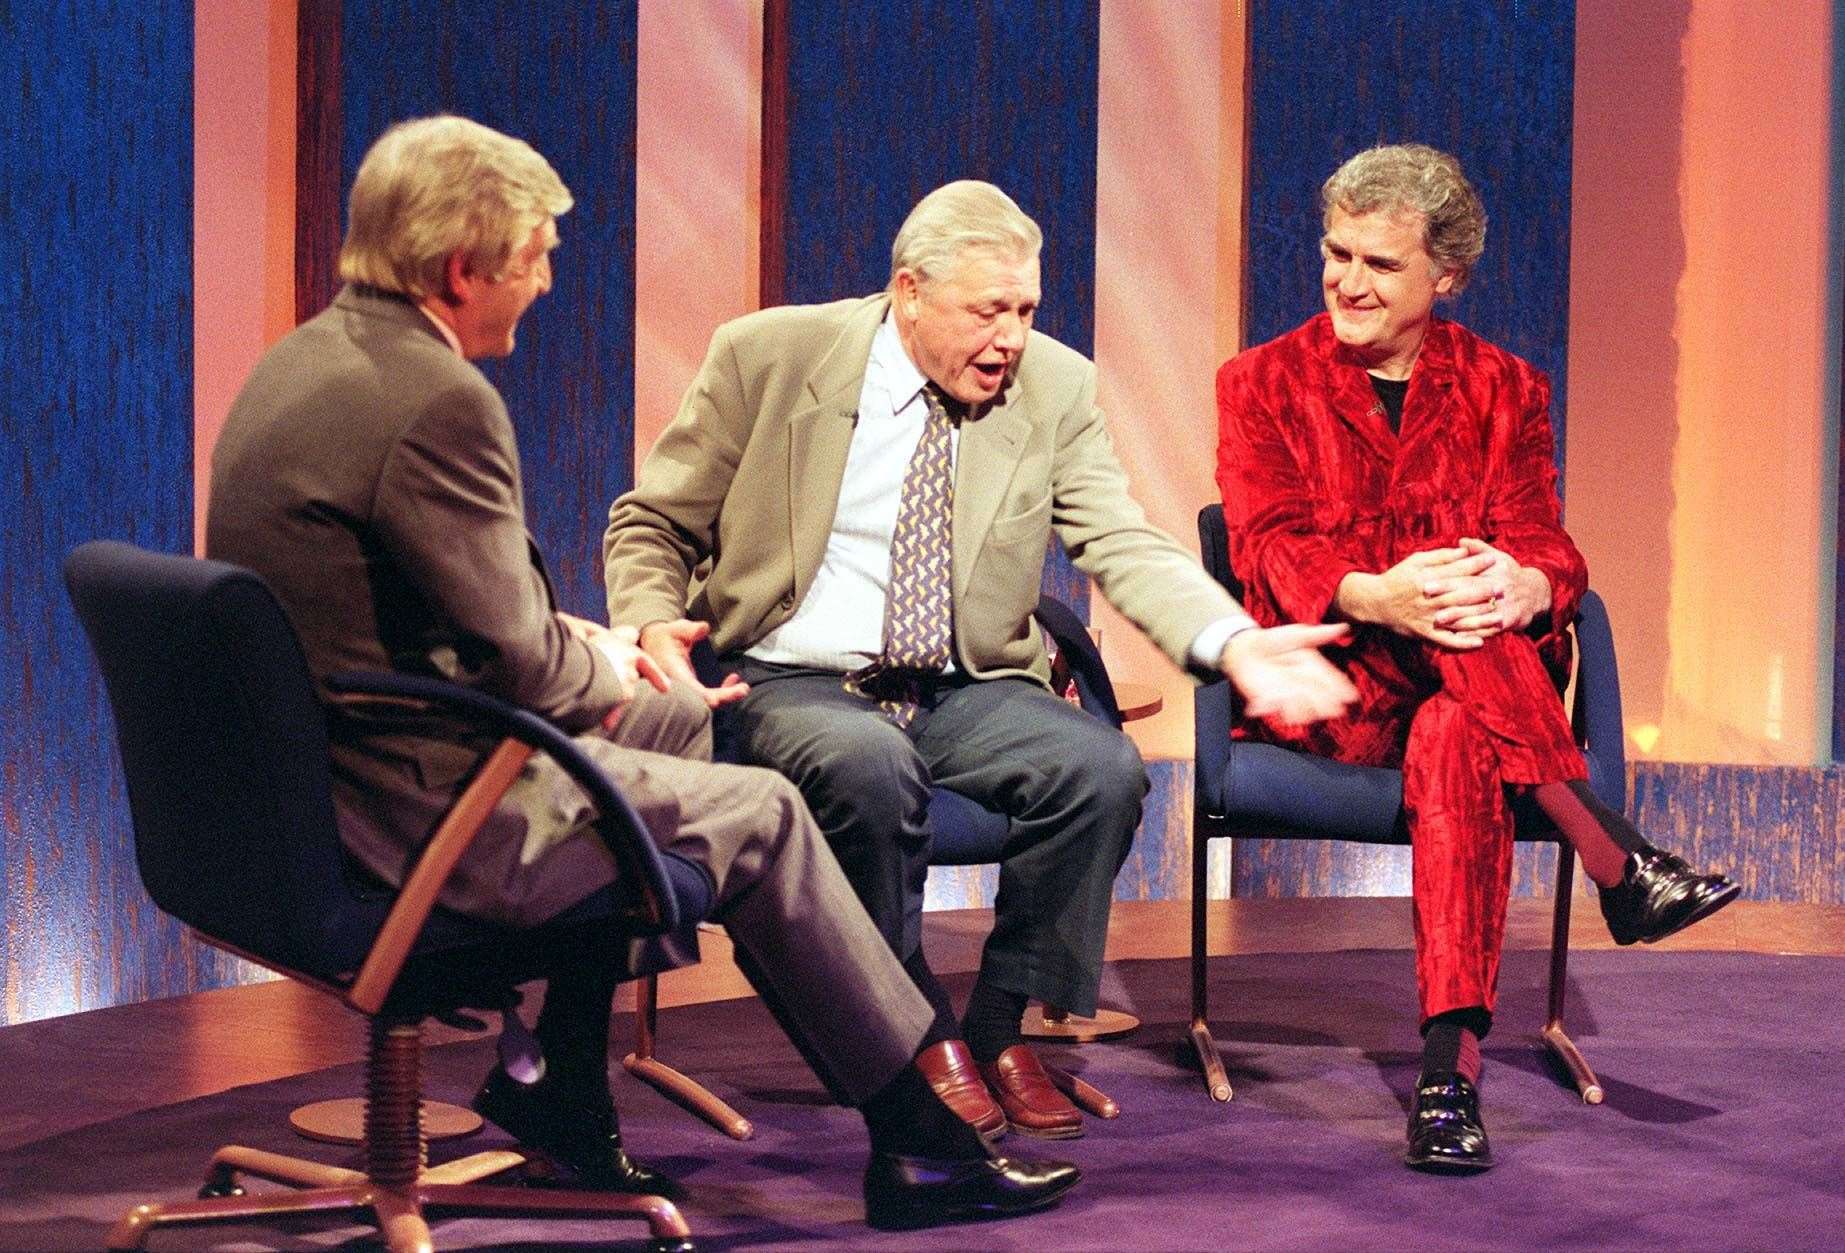 Sir Michael with wildlife expert Sir David Attenborough and comedian Sir Billy Connolly (right) during his talk show (BBC/PA)